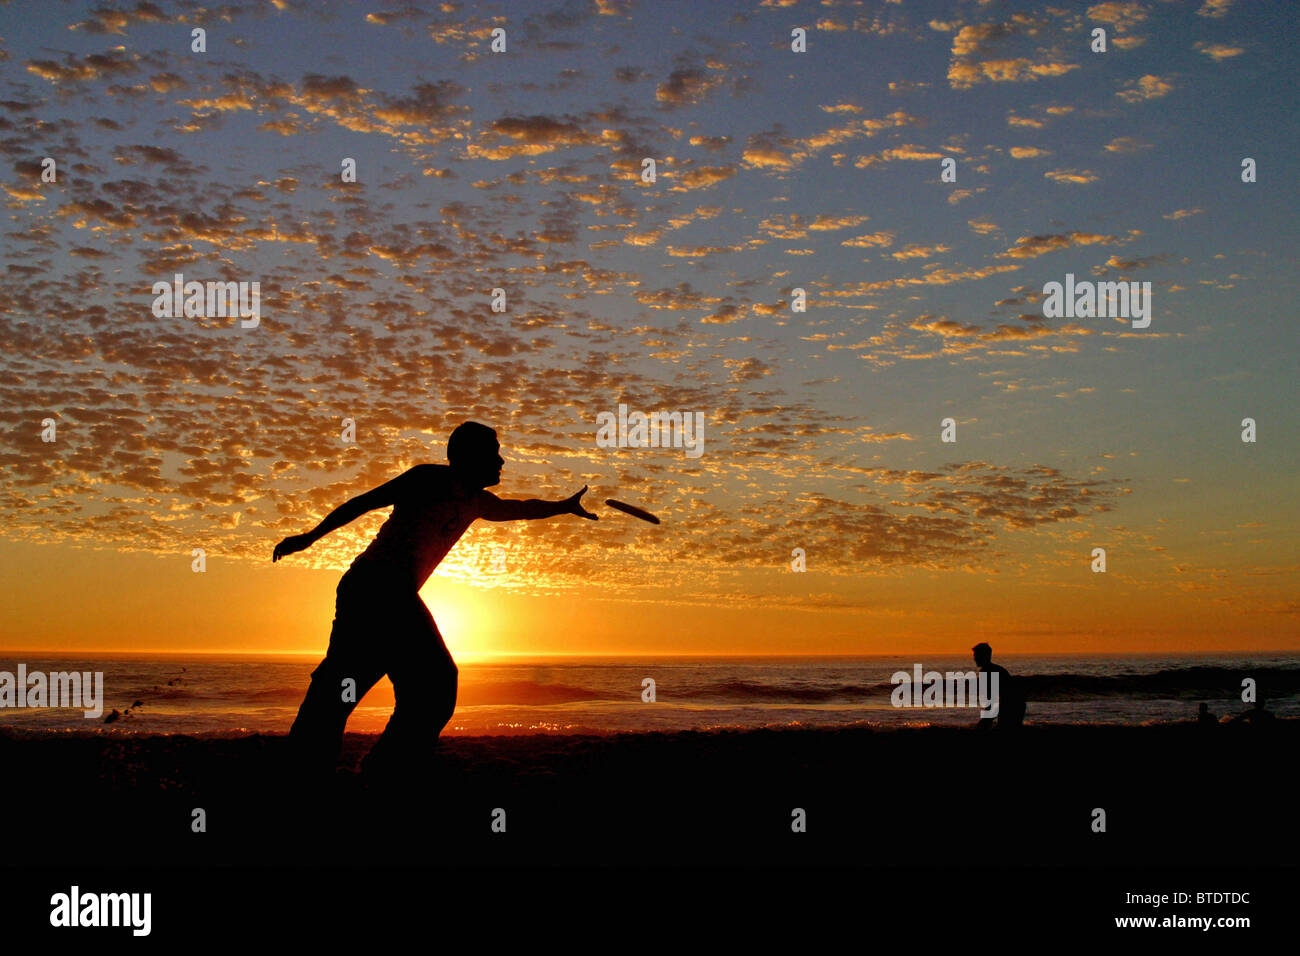 Two Frisbee players silhouetted on the beach at sunset Stock Photo